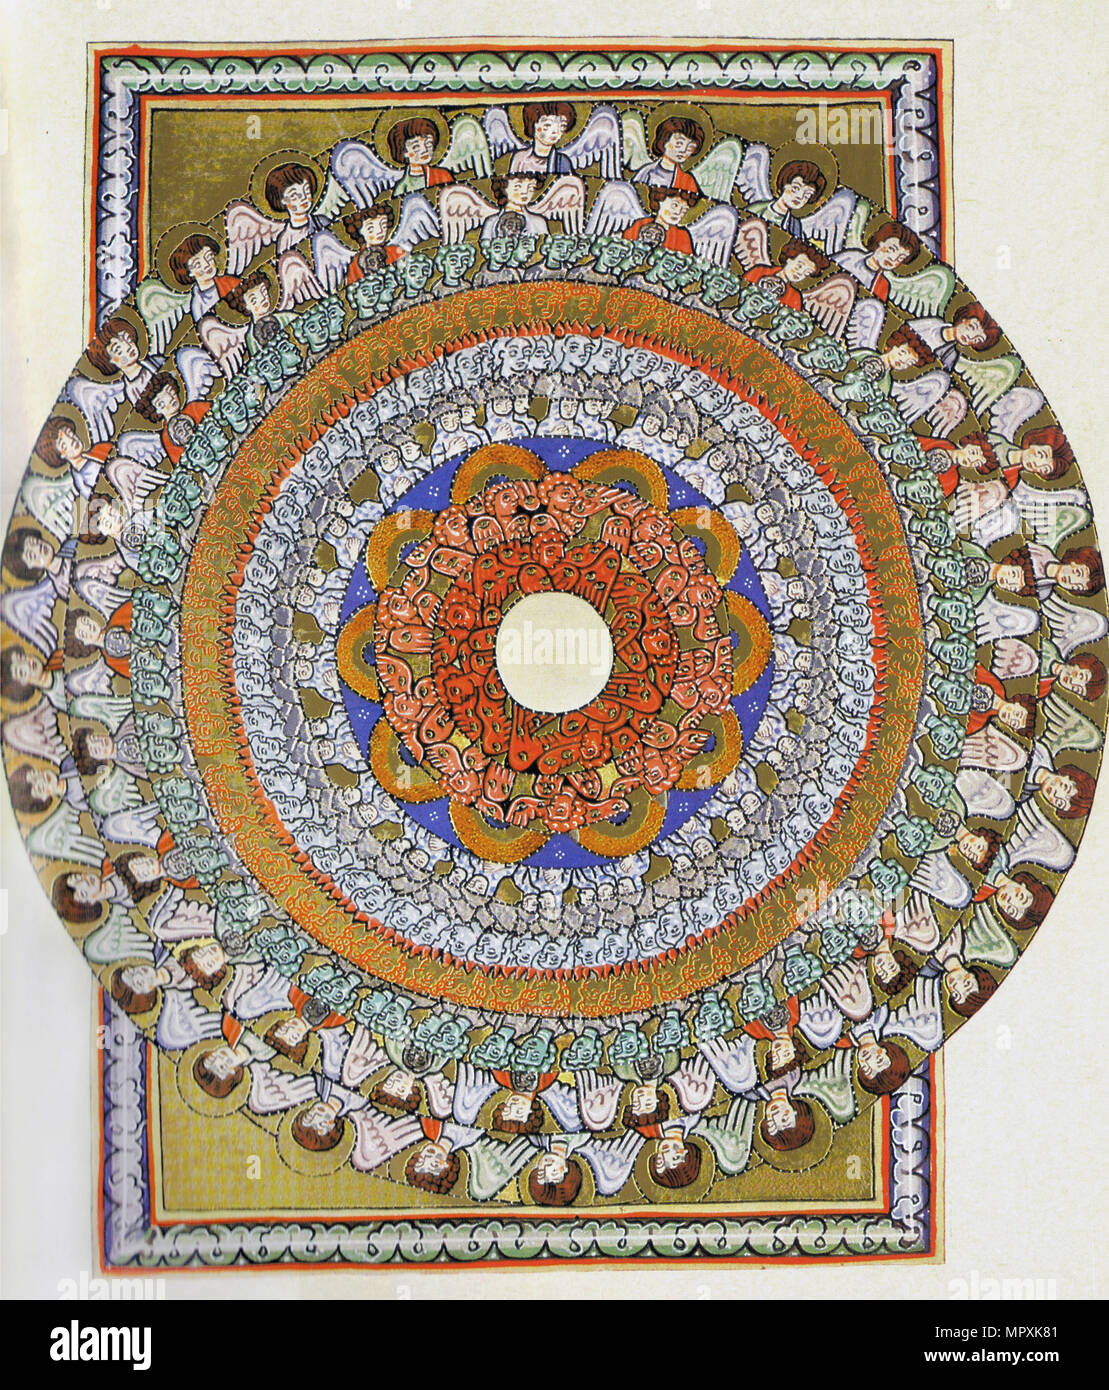 The Choir of Angels. Miniature from Liber Scivias by Hildegard of Bingen, c. 1175. Stock Photo